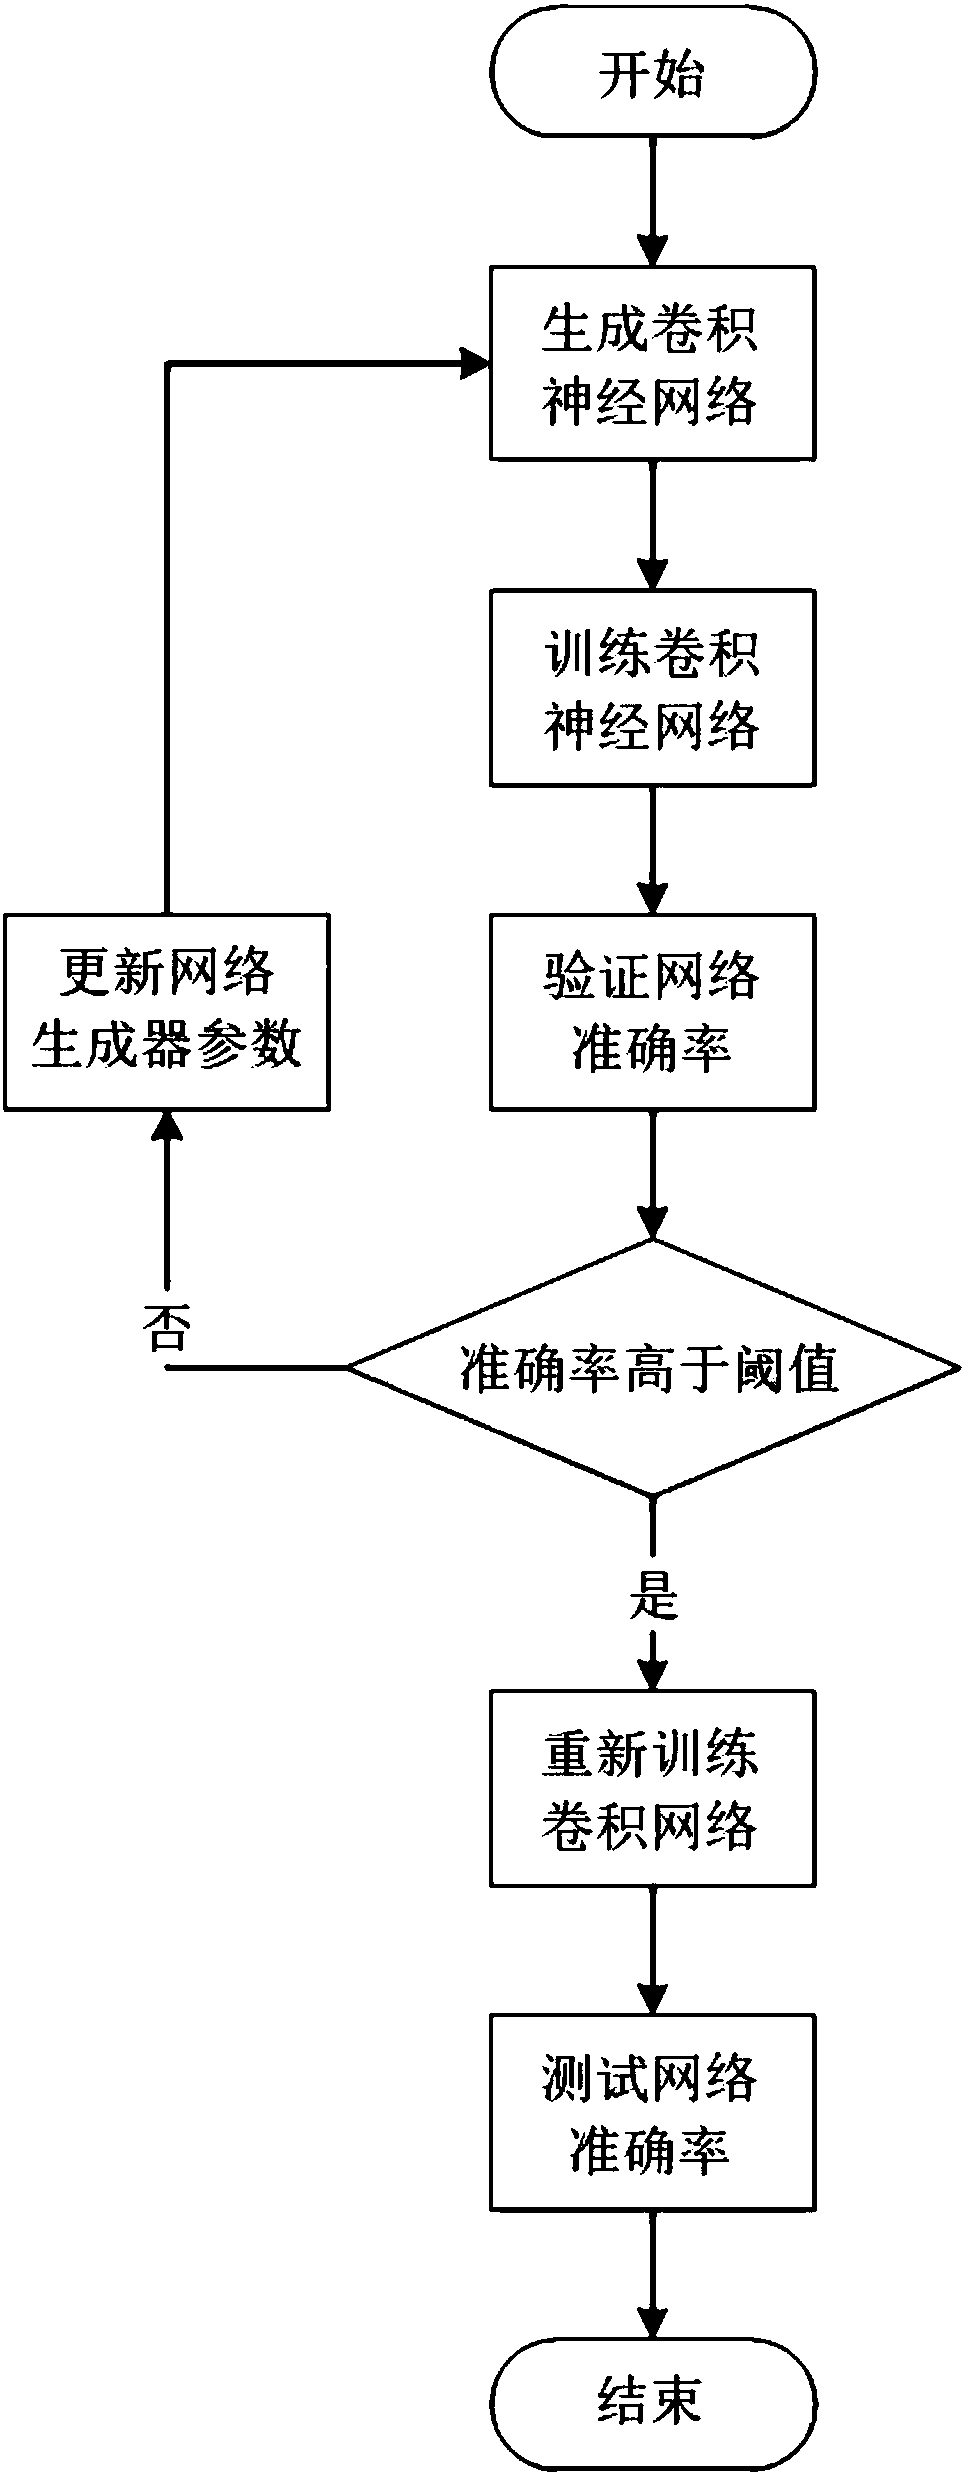 Network construction method and system for thyroid tumor cytology smear image classification